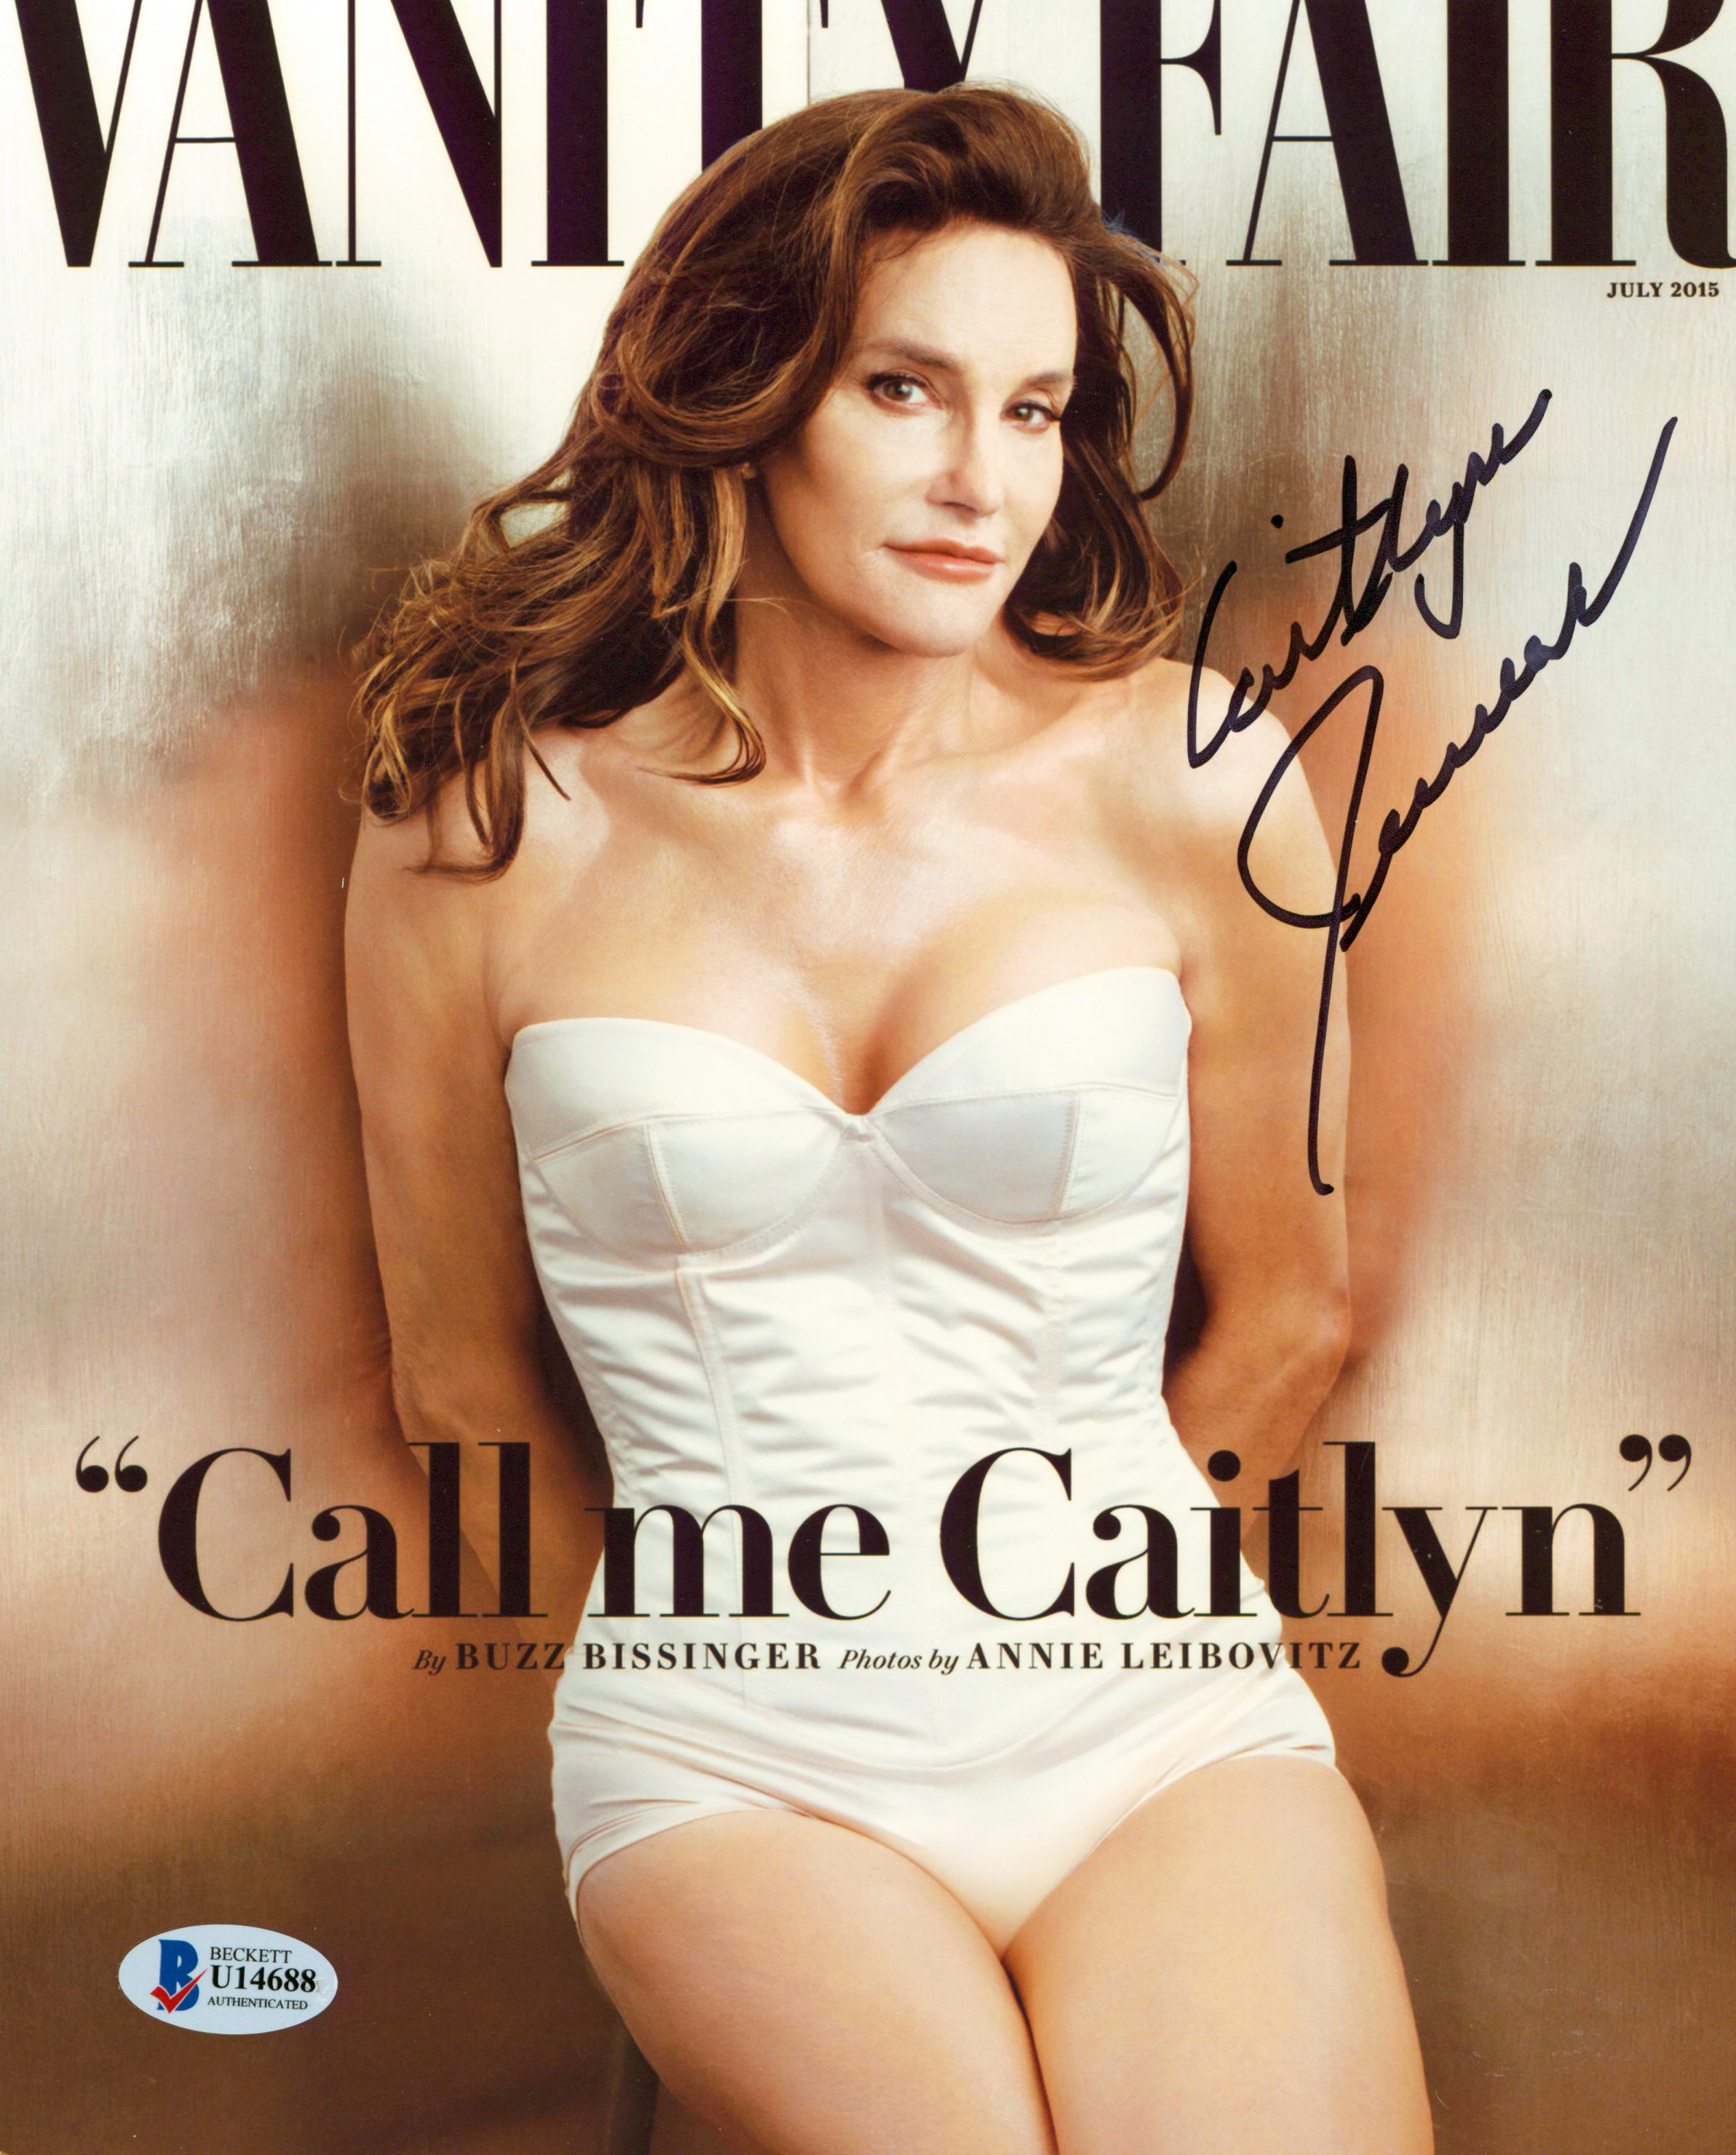 Press Pass Collectibles Caitlyn Jenner Vanity Fair Authentic Signed 8x10 Photo Autographed BAS #U14688